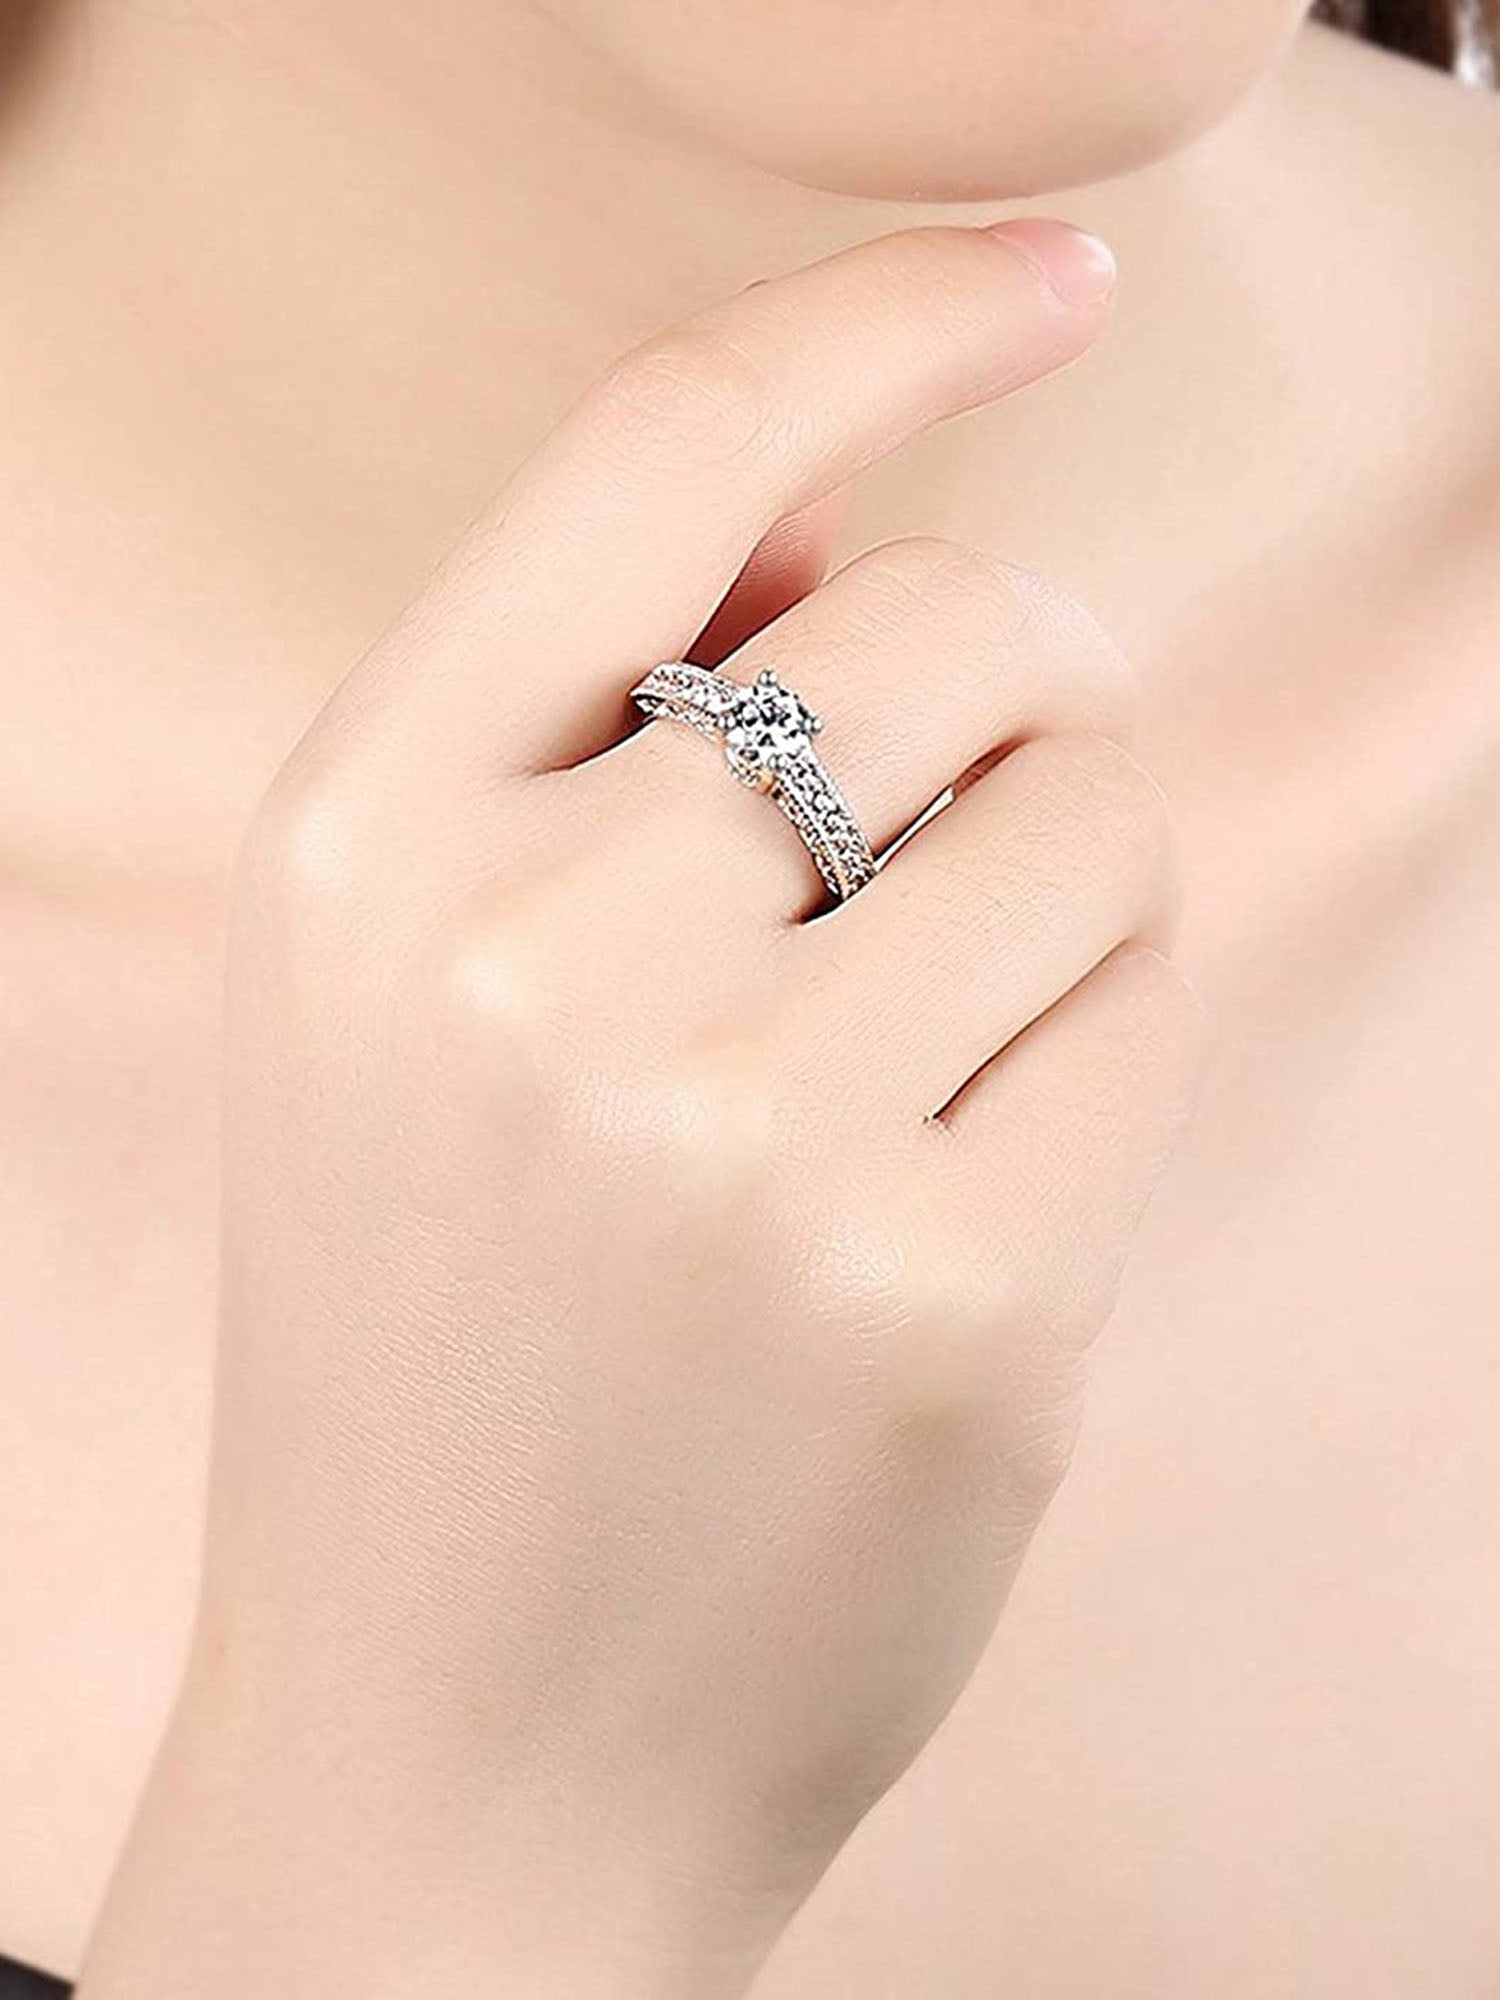 Platinum Plated Austrian Crystal Adjustable Ring for Women